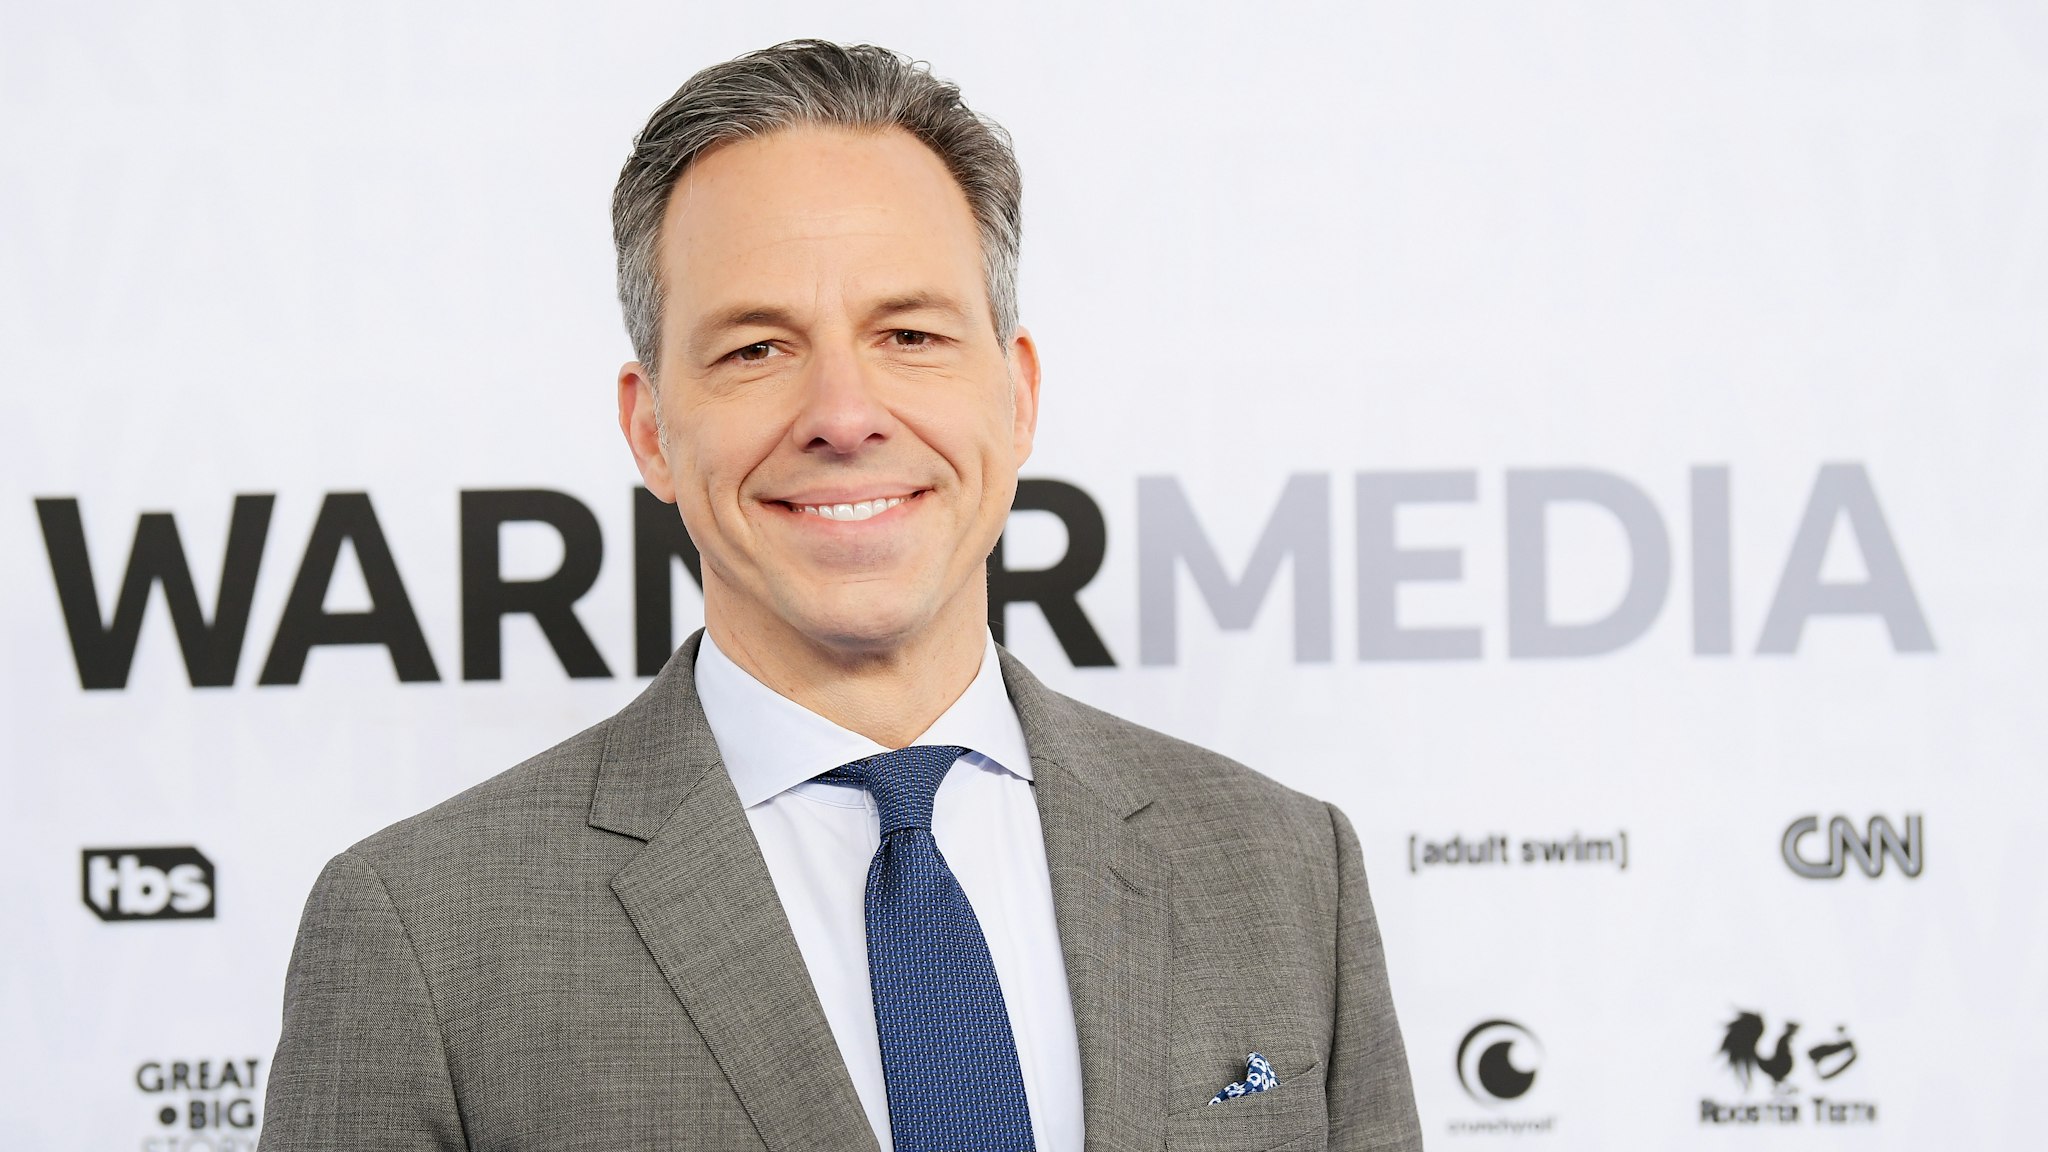 Jake Tapper of CNN’s The Lead with Jake Tapper and CNN’s State of the Union with Jake Tapper attends the WarnerMedia Upfront 2019 arrivals on the red carpet at The Theater at Madison Square Garden on May 15, 2019 in New York City.